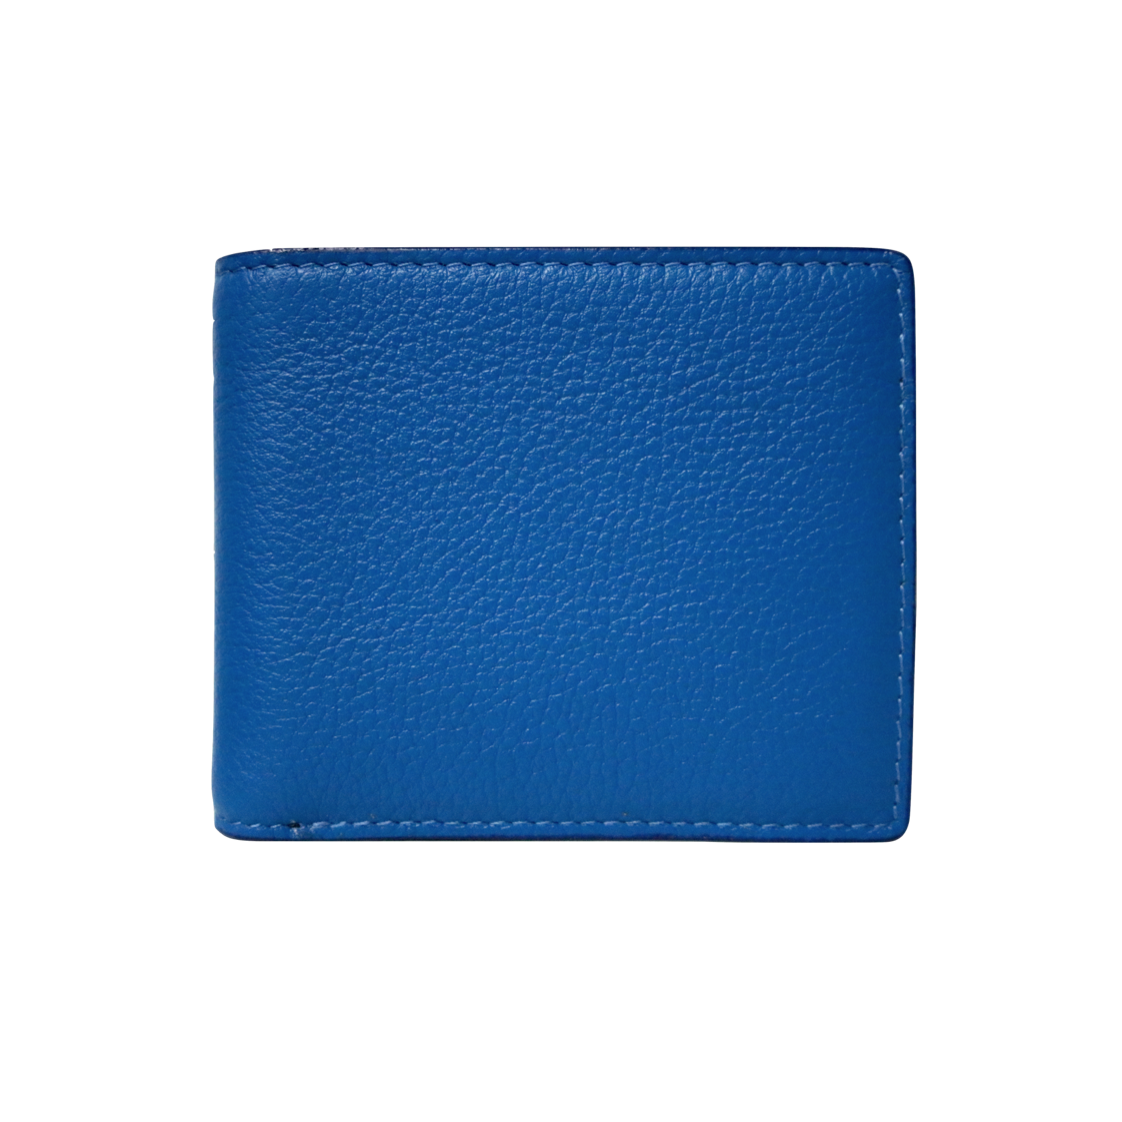 Image of Blue Pebbled Leather Classic Bifold Wallet